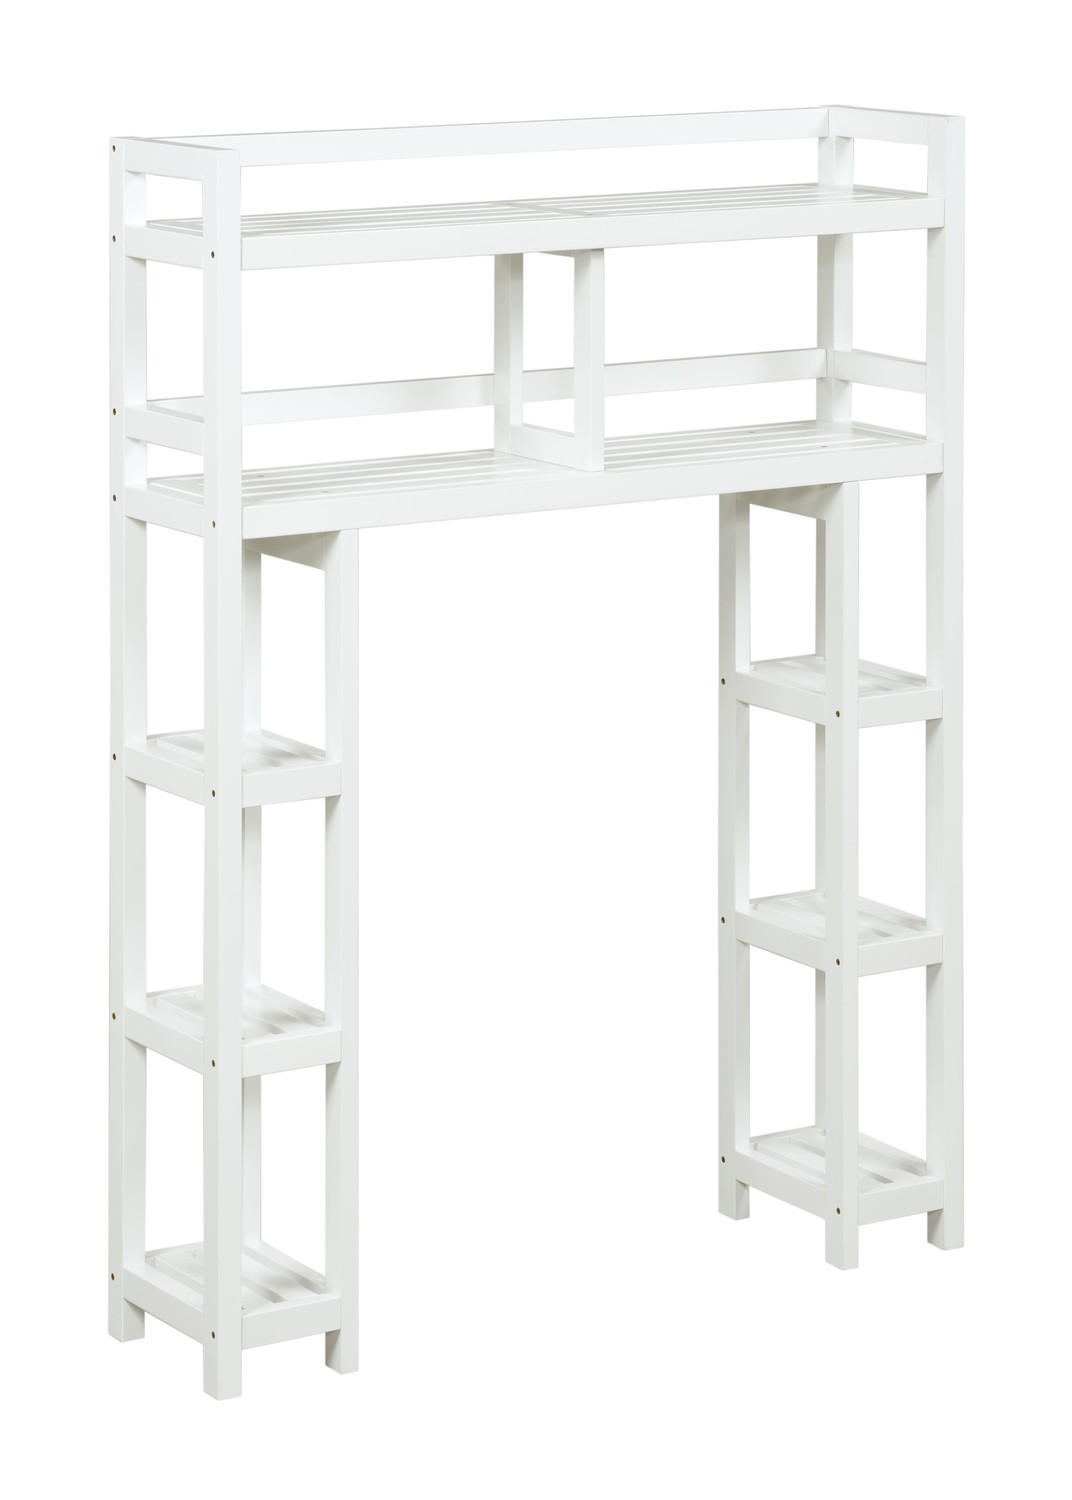 48" Bathroom Organizer with side storage with 2 Shelves in White